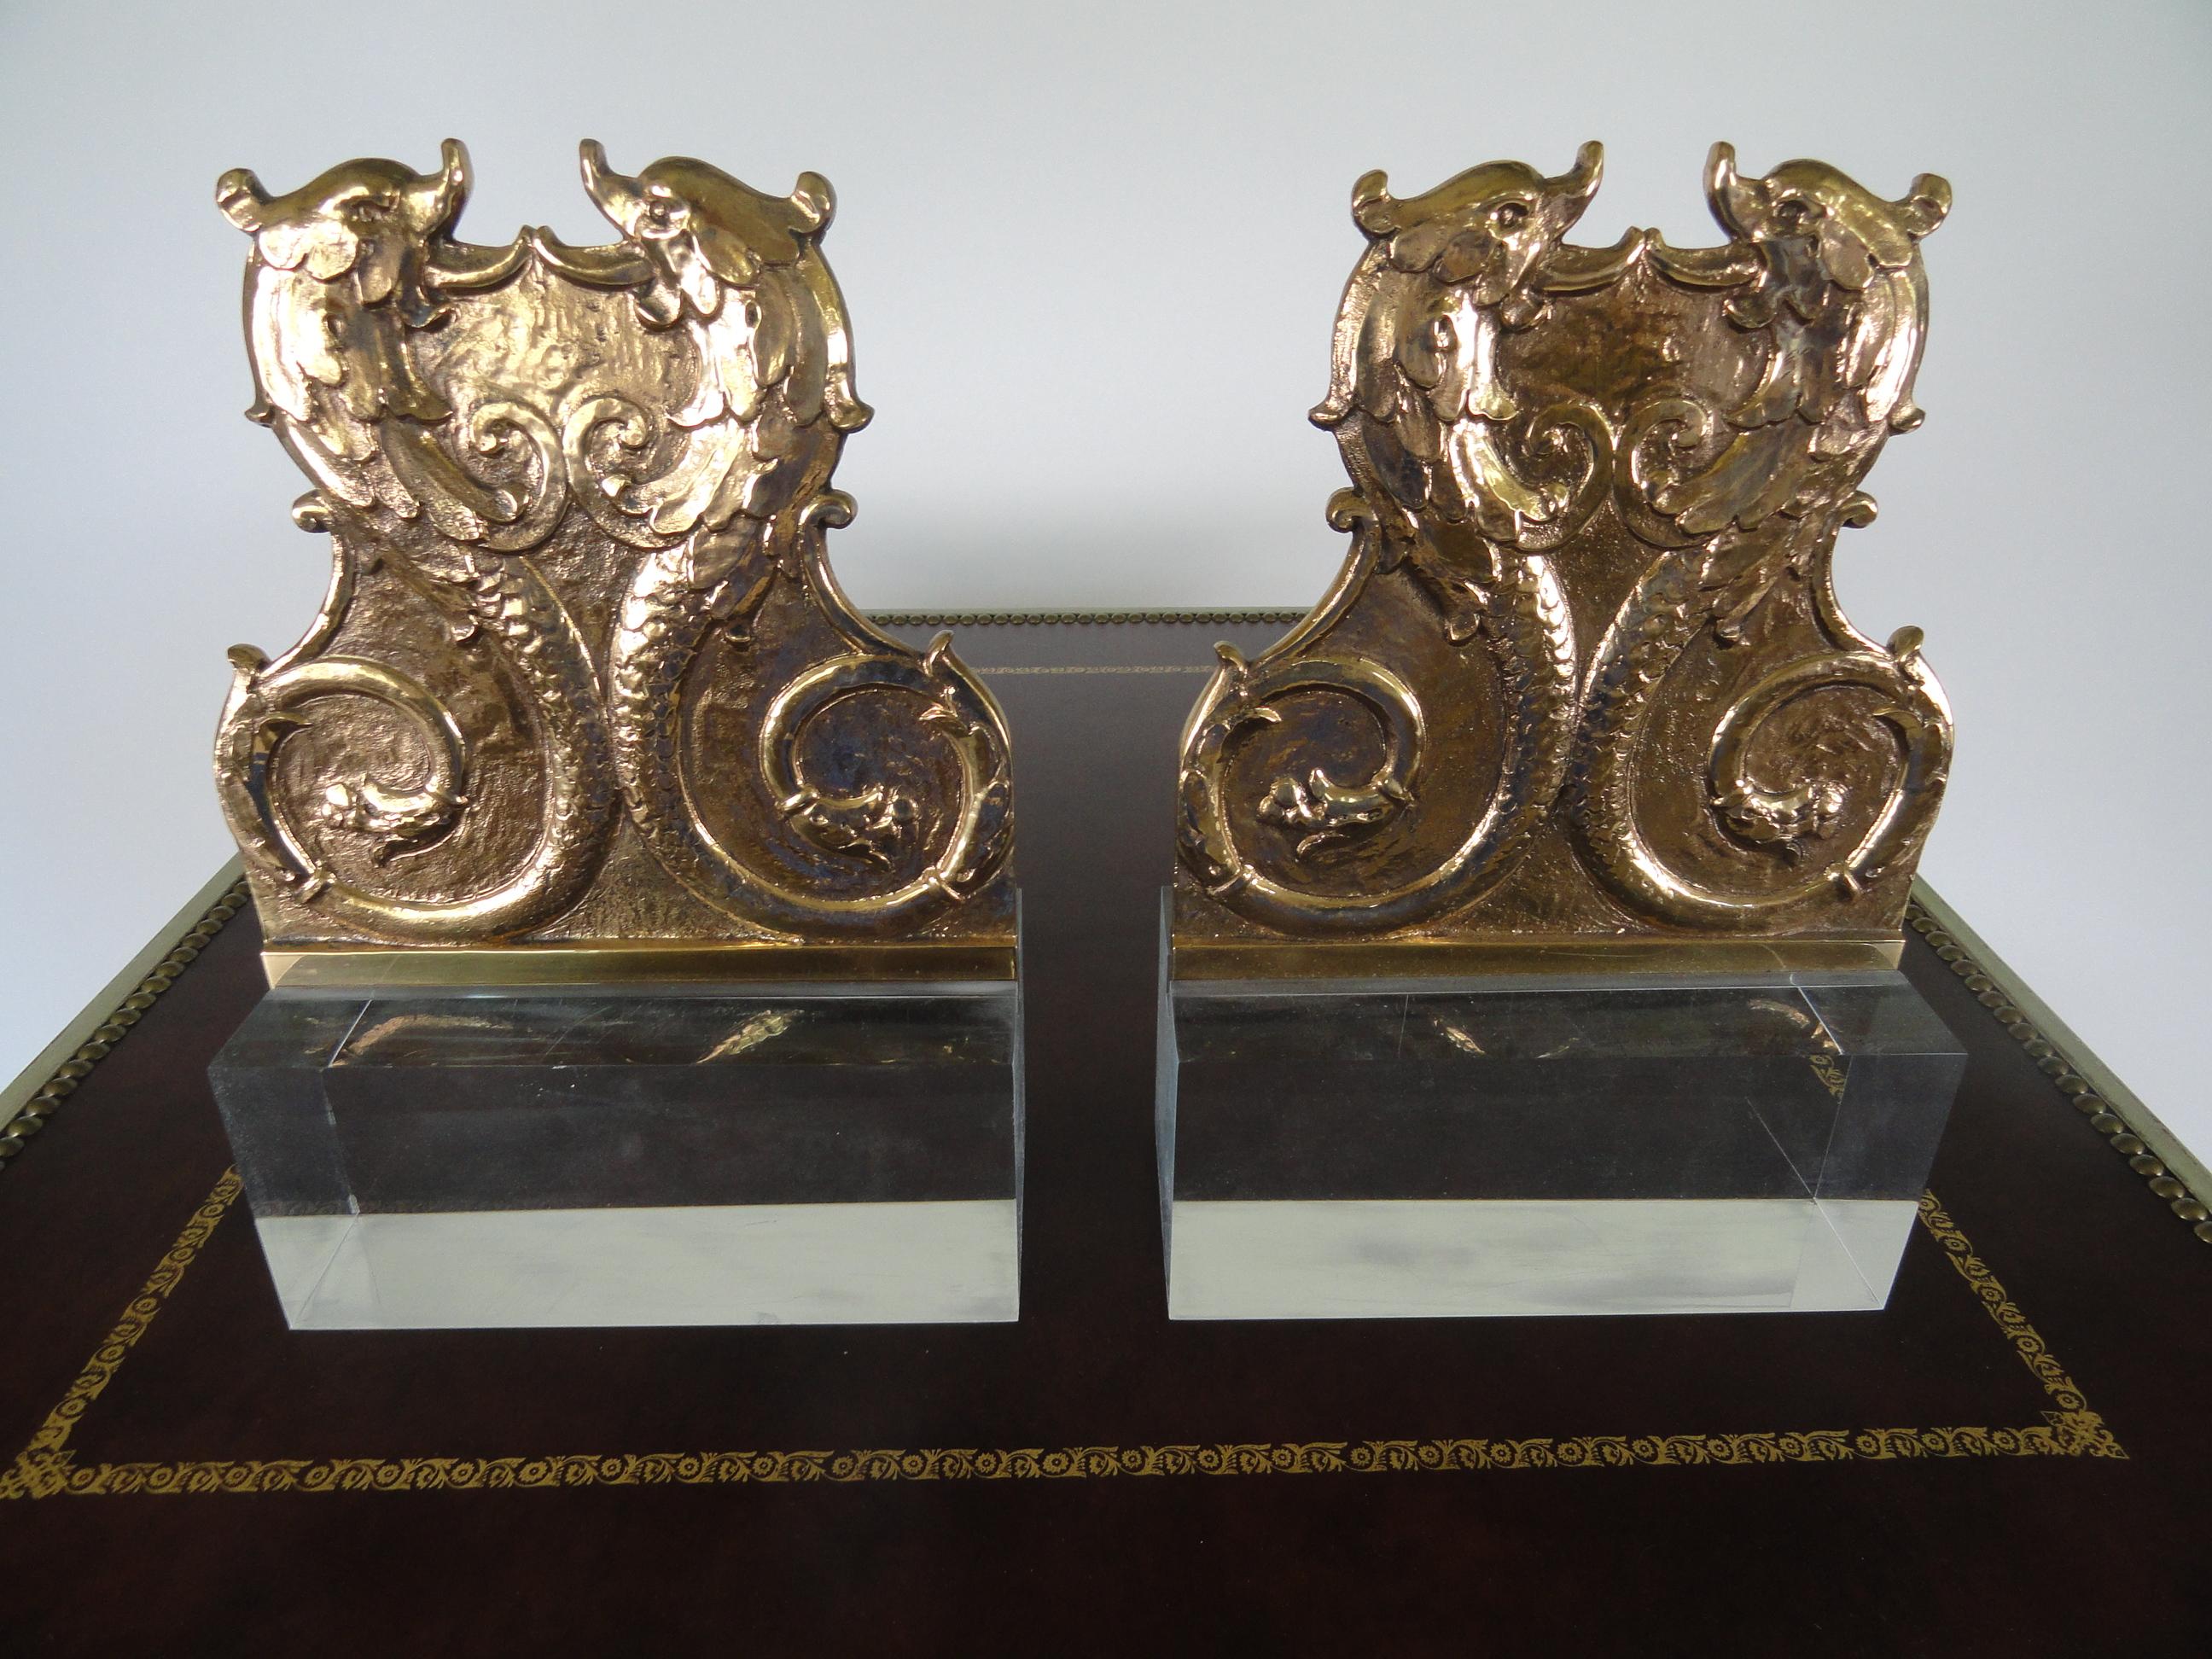 Pair of 19th century French decor dolphin plaques mounted on new, custom clear acrylic bases.